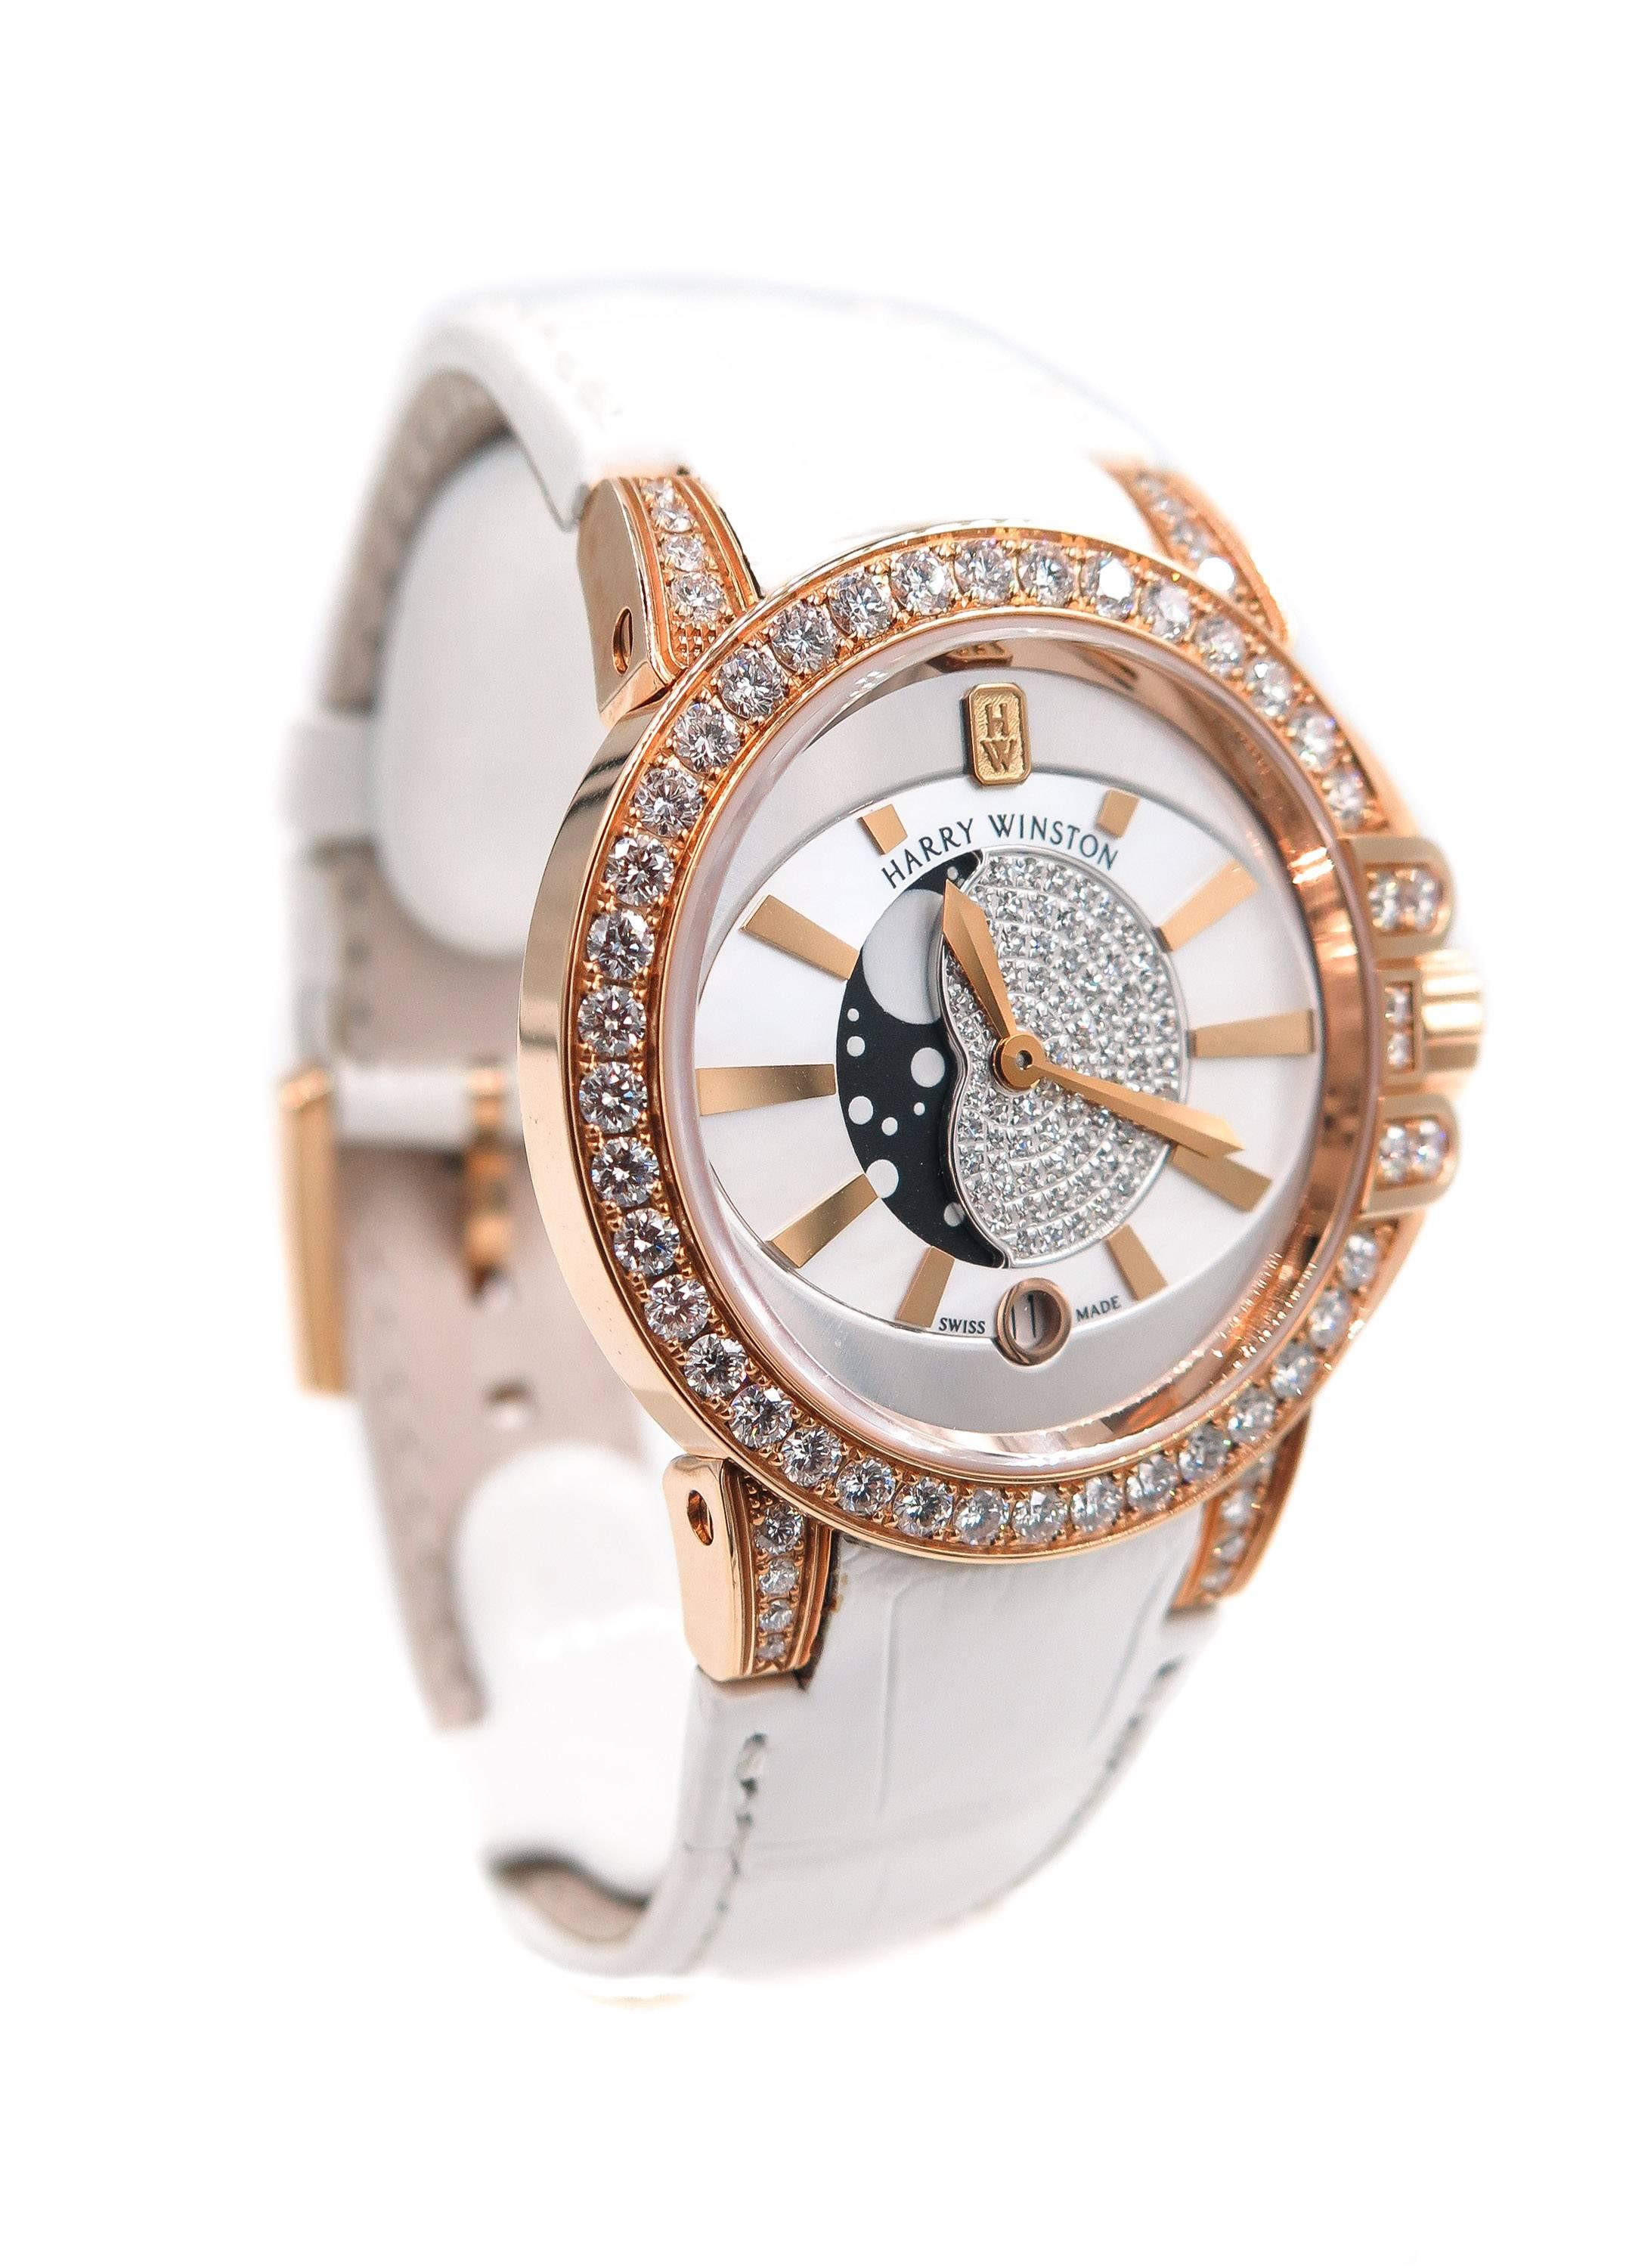 A modern balance of sporty elegance and the flawless execution of the most precious jewels.
This Ocean timepiece of incredible sophistication, features a luxurious rose gold case with a striking combination of white mother-of-pearl center dial,